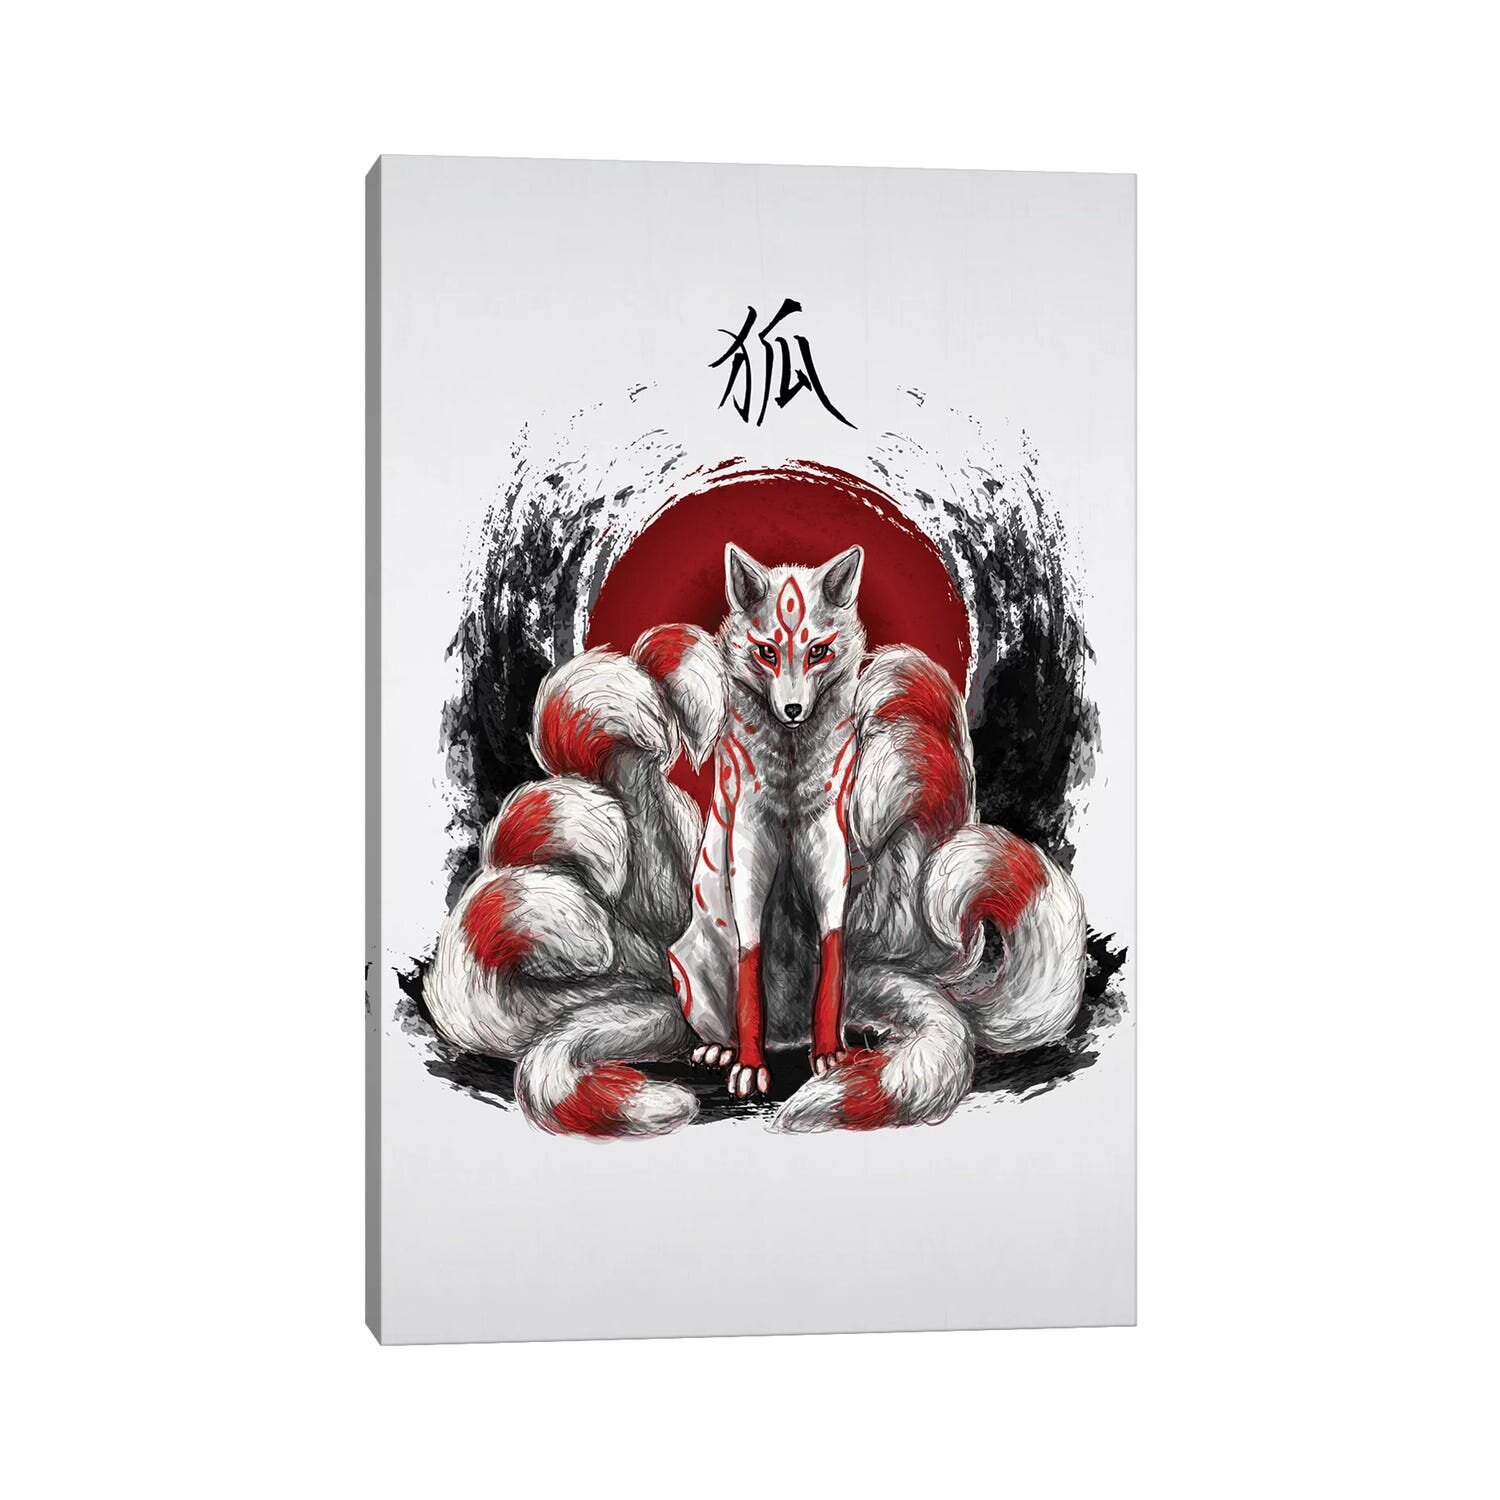 GRAPHICS & MORE Kitsune Nine-Tailed Fox Home Business Office Sign 